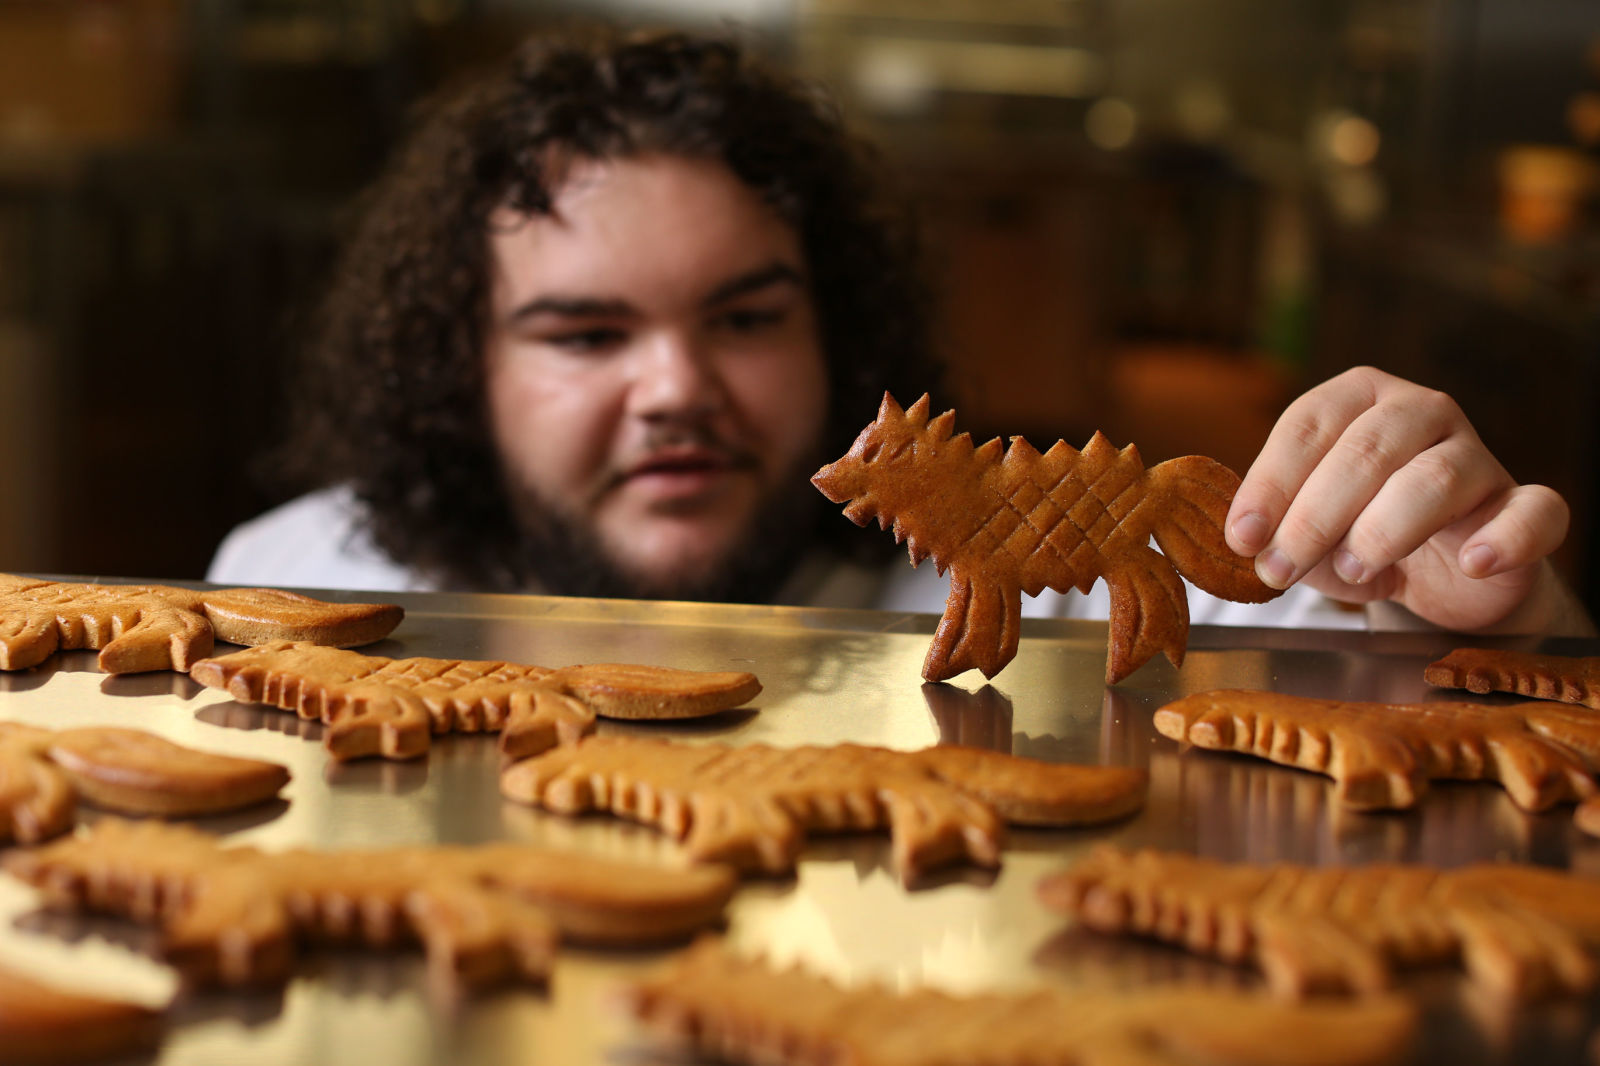 The Actor Who Plays Game Of Thrones’ Hot Pie Has A Real Bakery And Sells Direwolf Bread